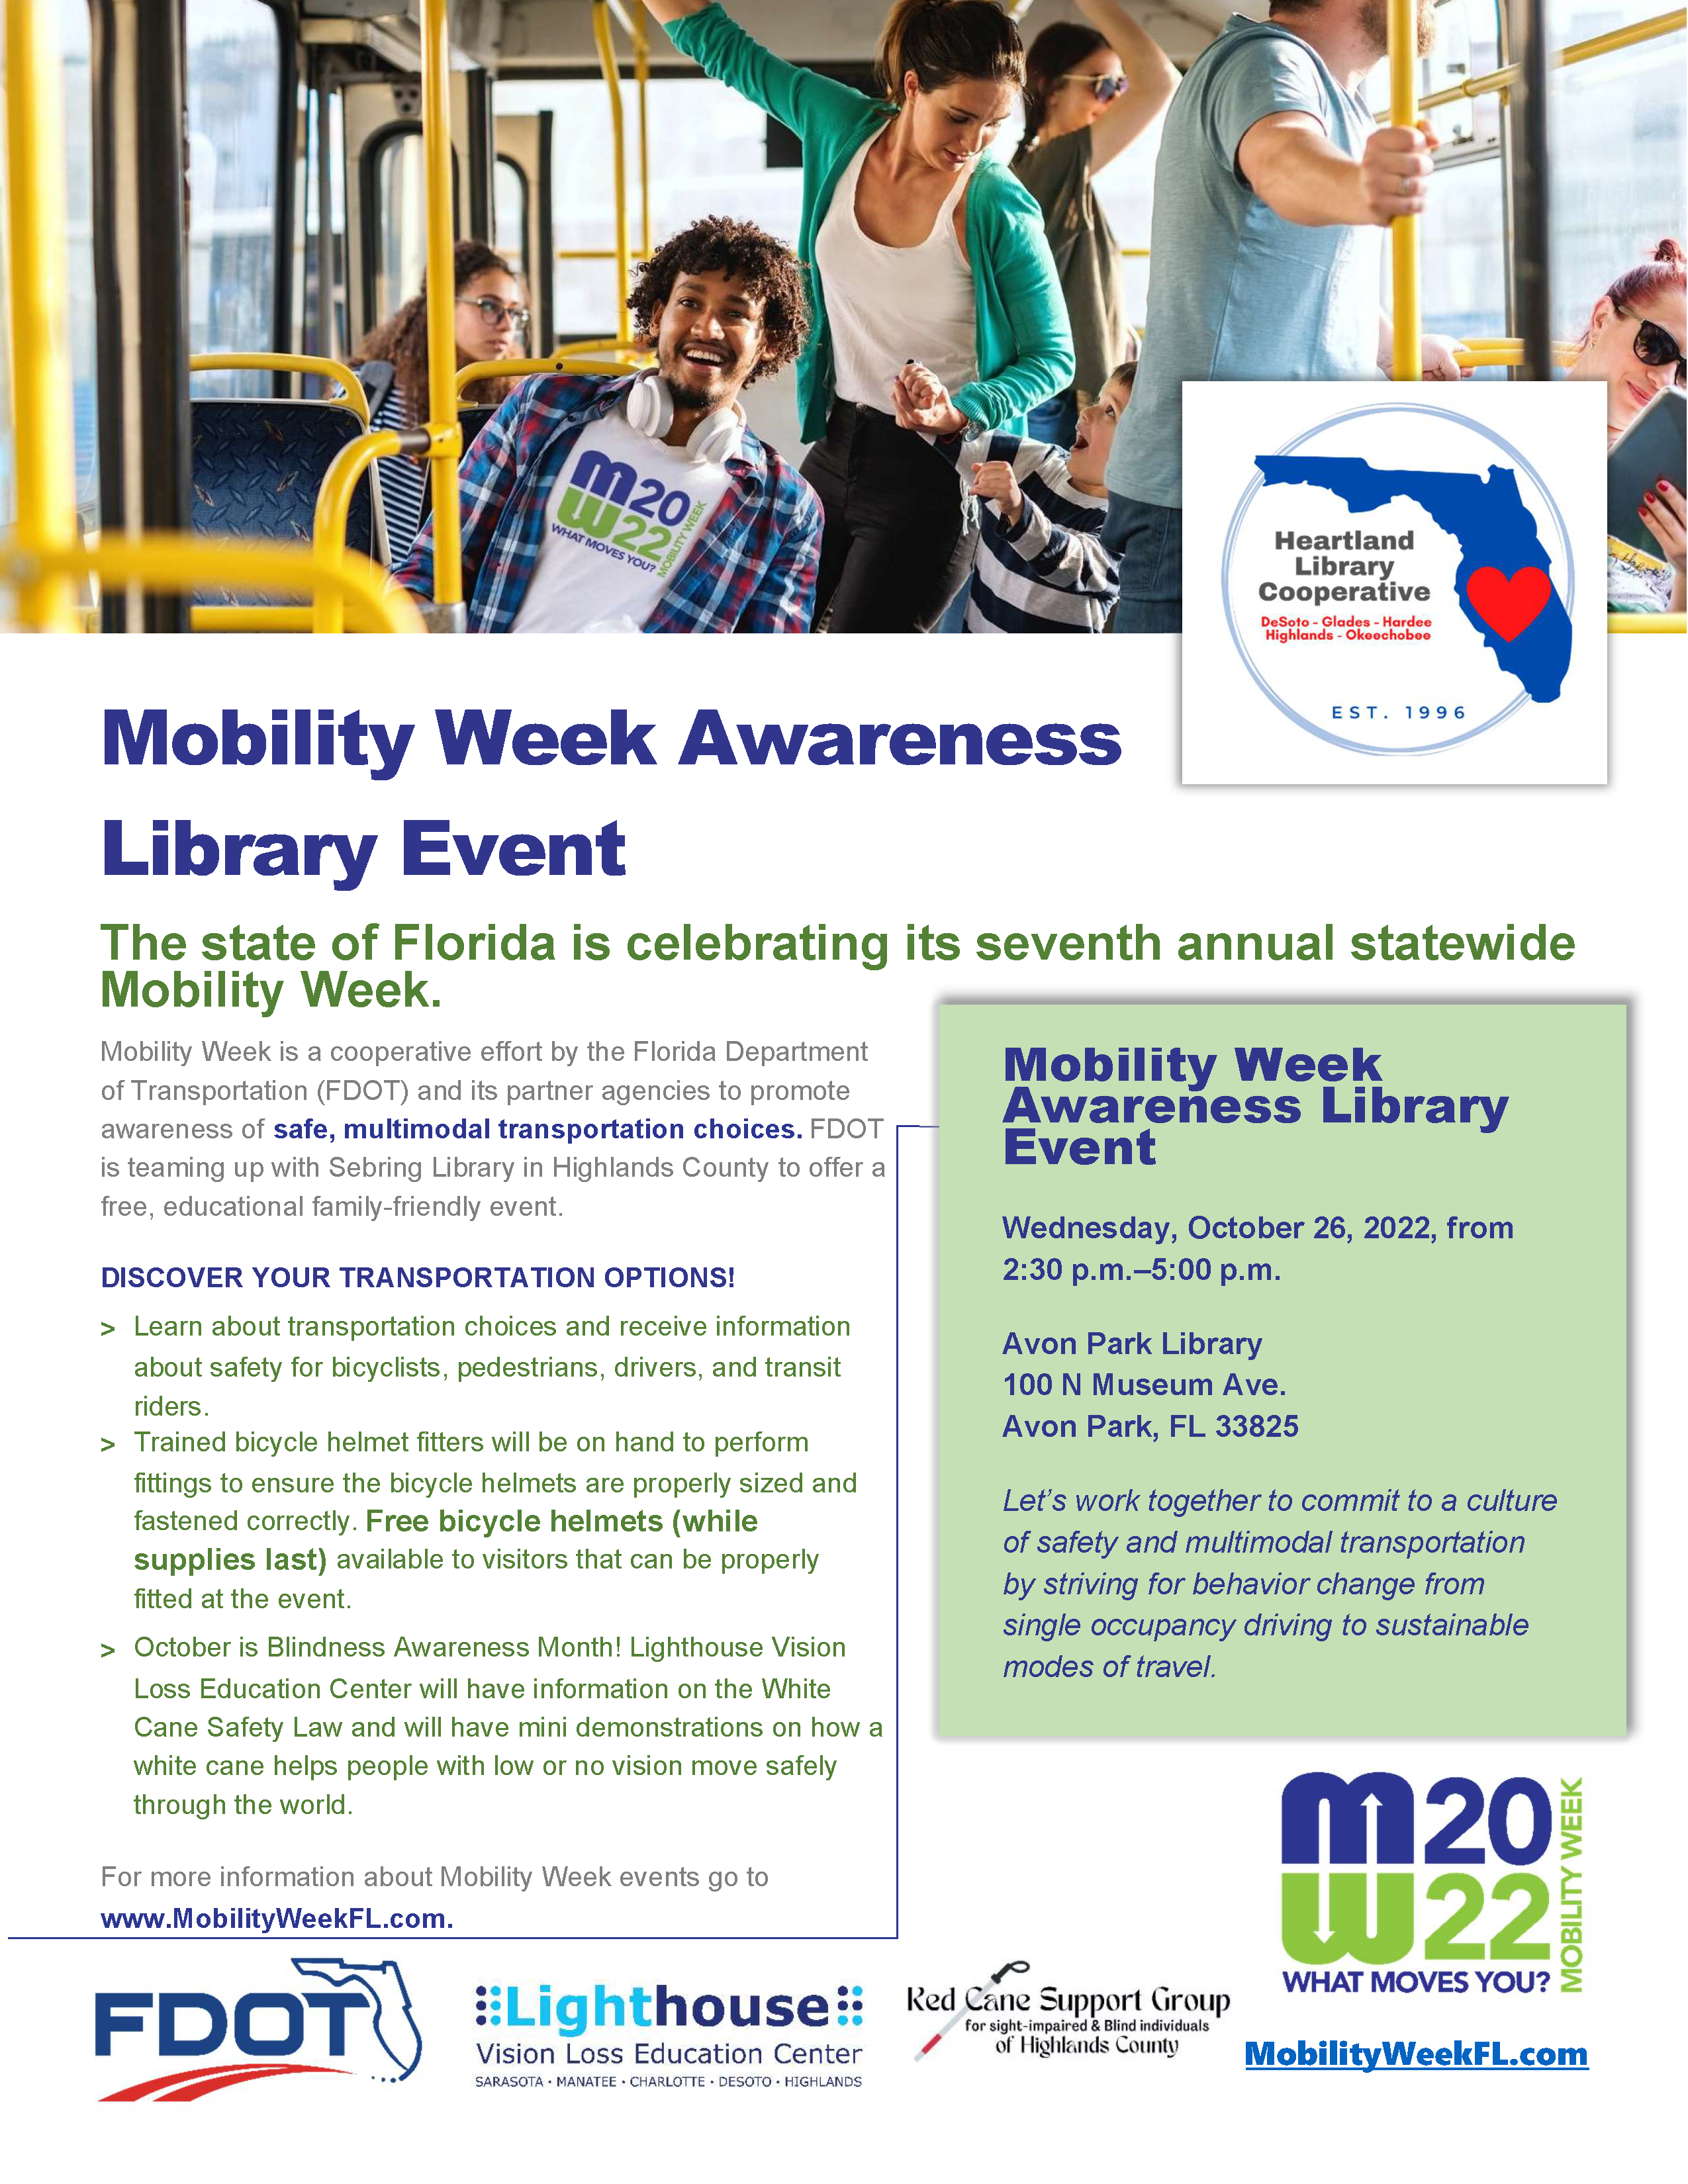 The Florida Department of Transportation will be hosting a Mobility Week Awareness event at the Avon Park Library on Wednesday, October 26th from 2:30  p.m. to 5:00 p.m."